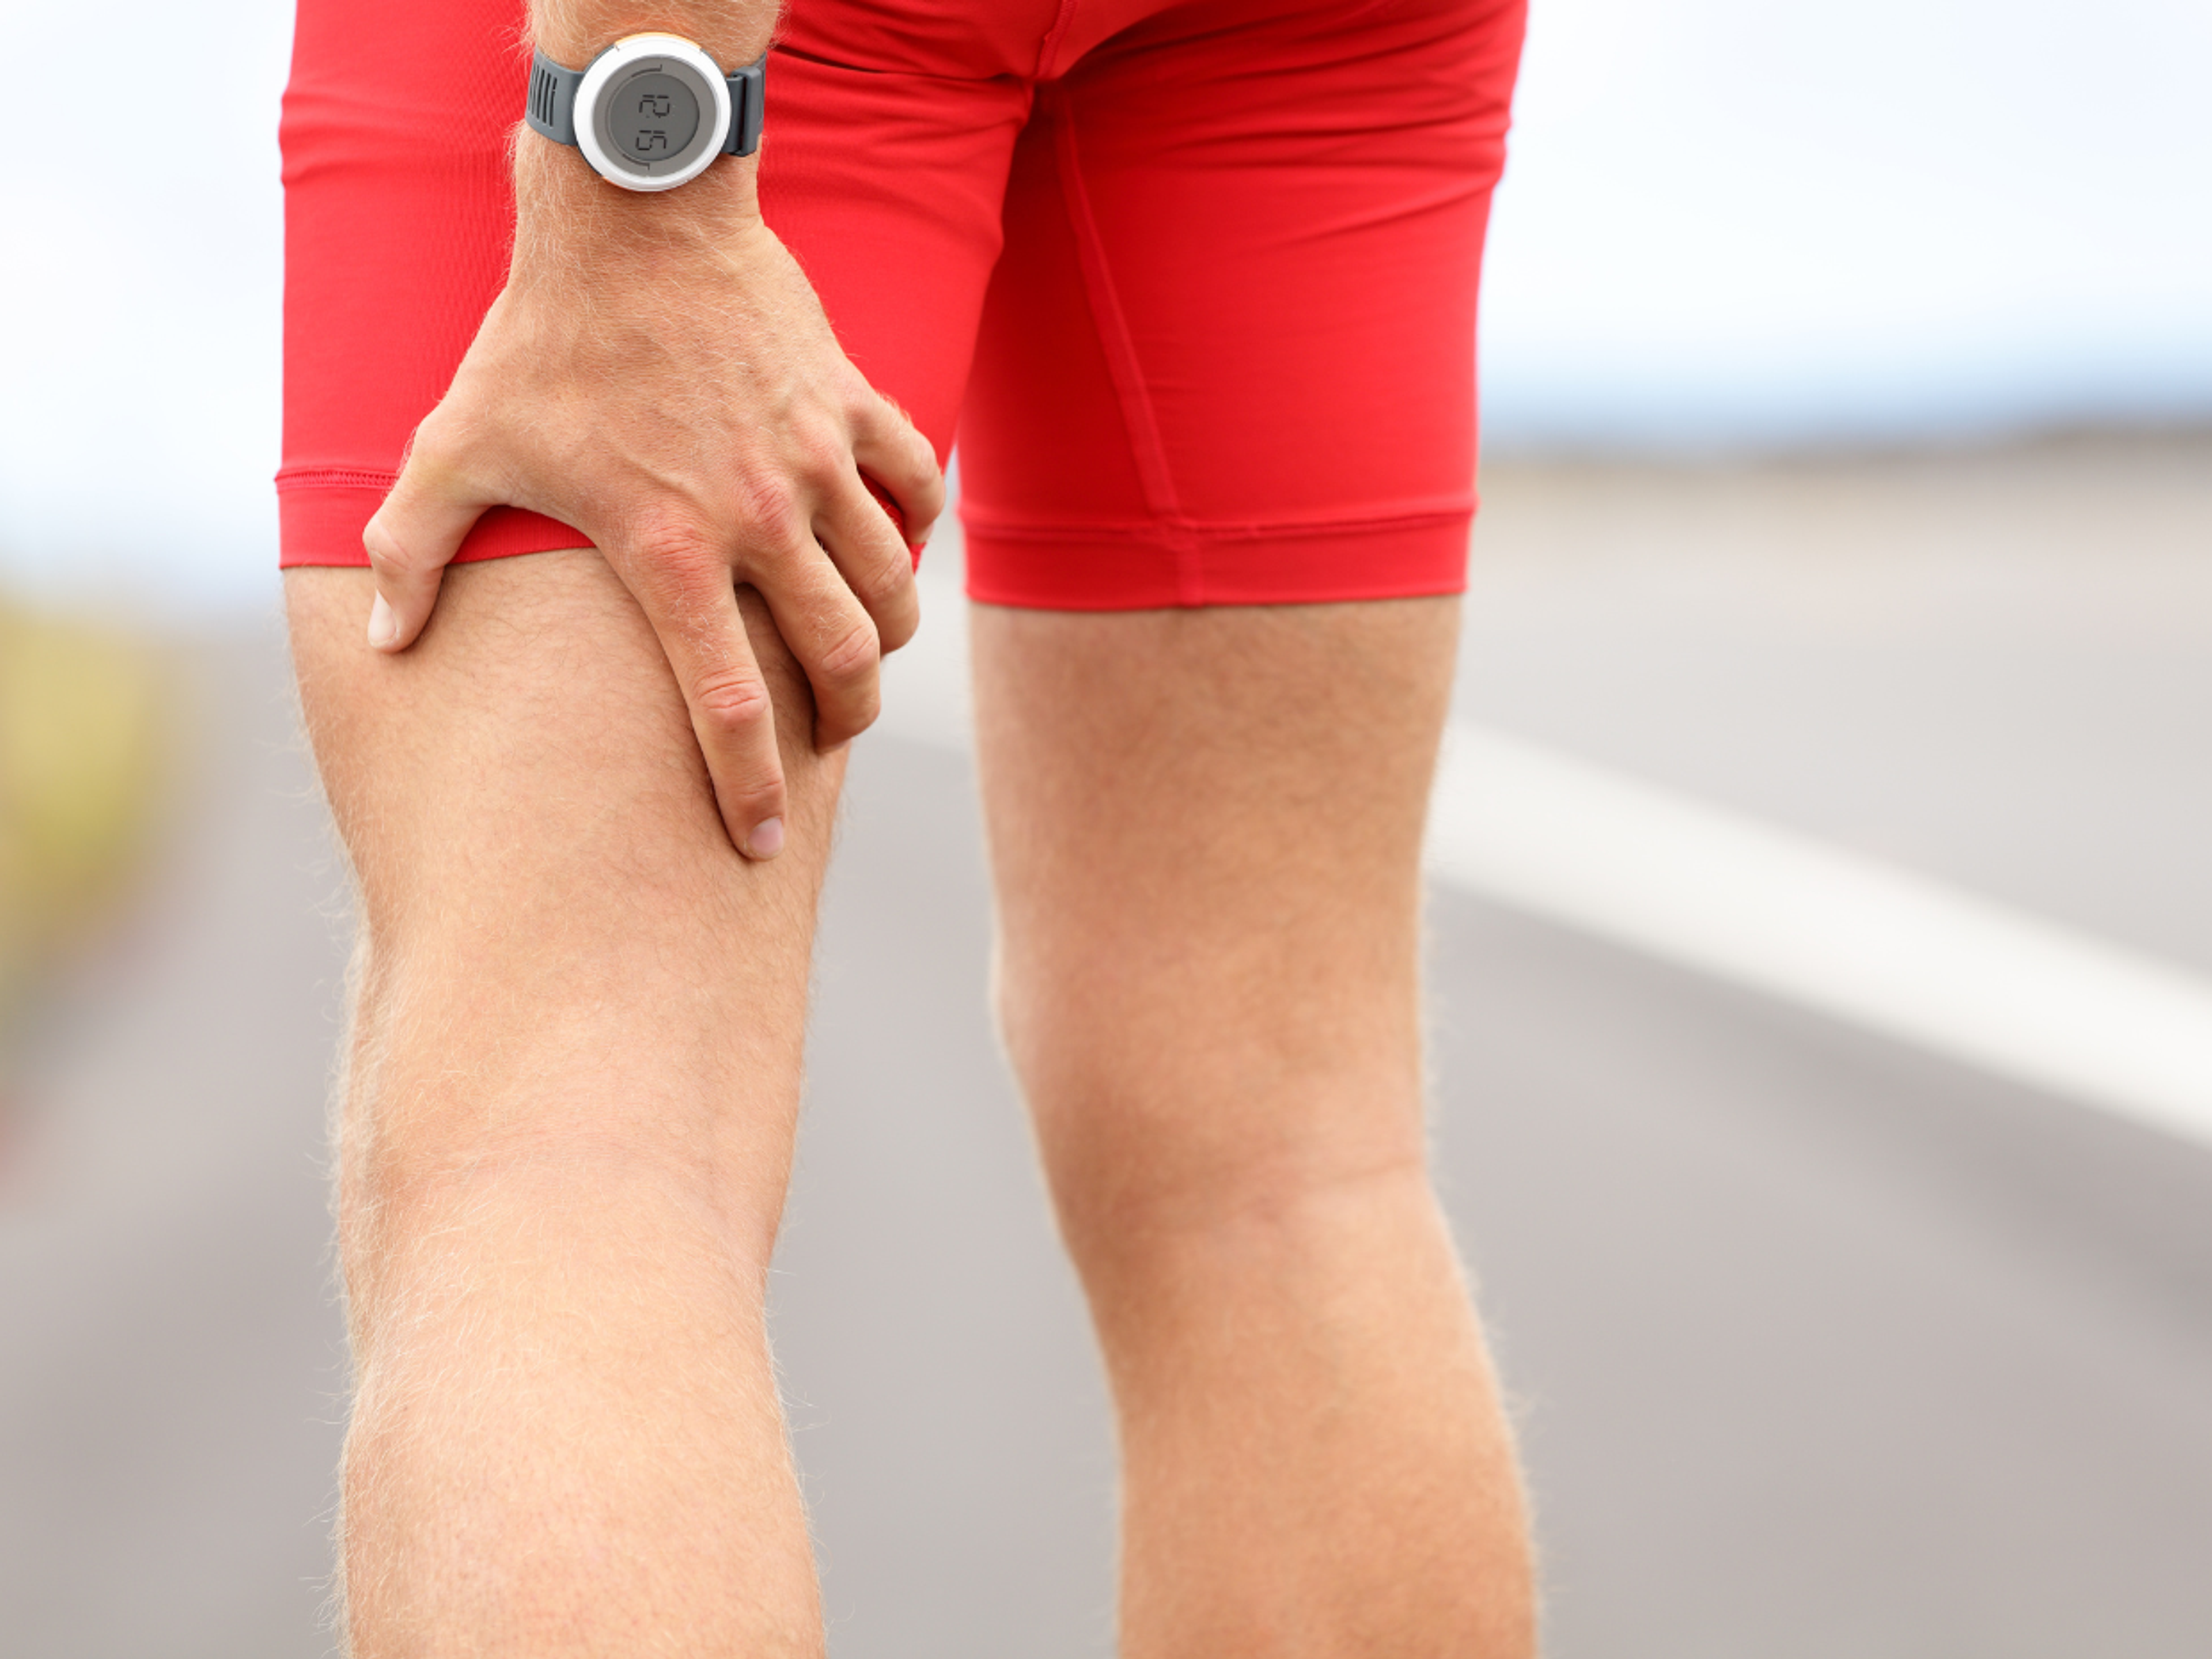 How long a pulled muscle takes to heal depends on the severity and what tissue is injured.